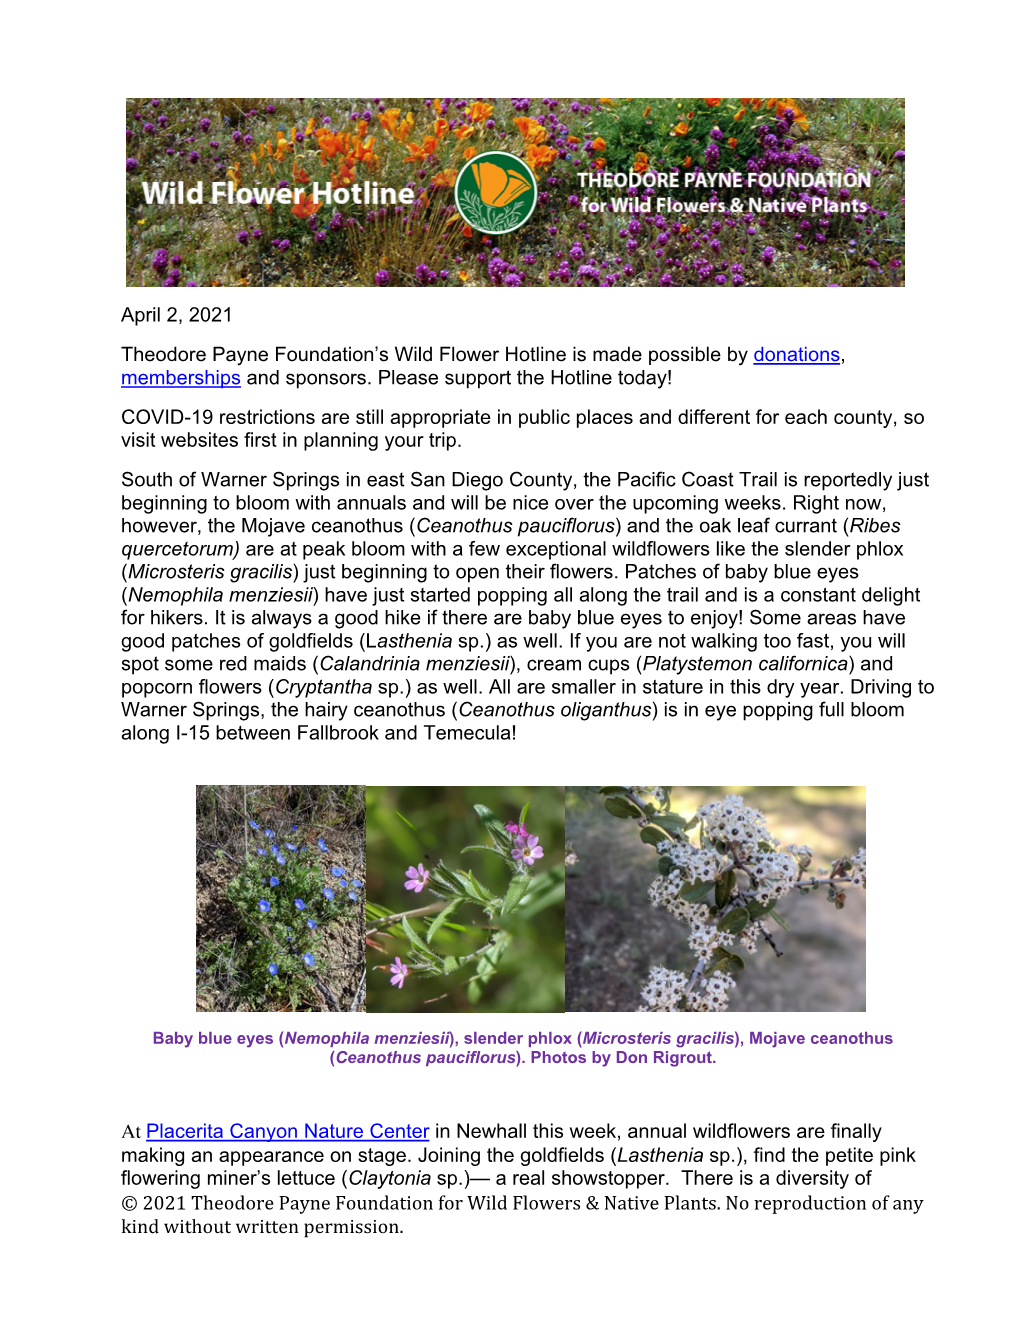 © 2021 Theodore Payne Foundation for Wild Flowers & Native Plants. No